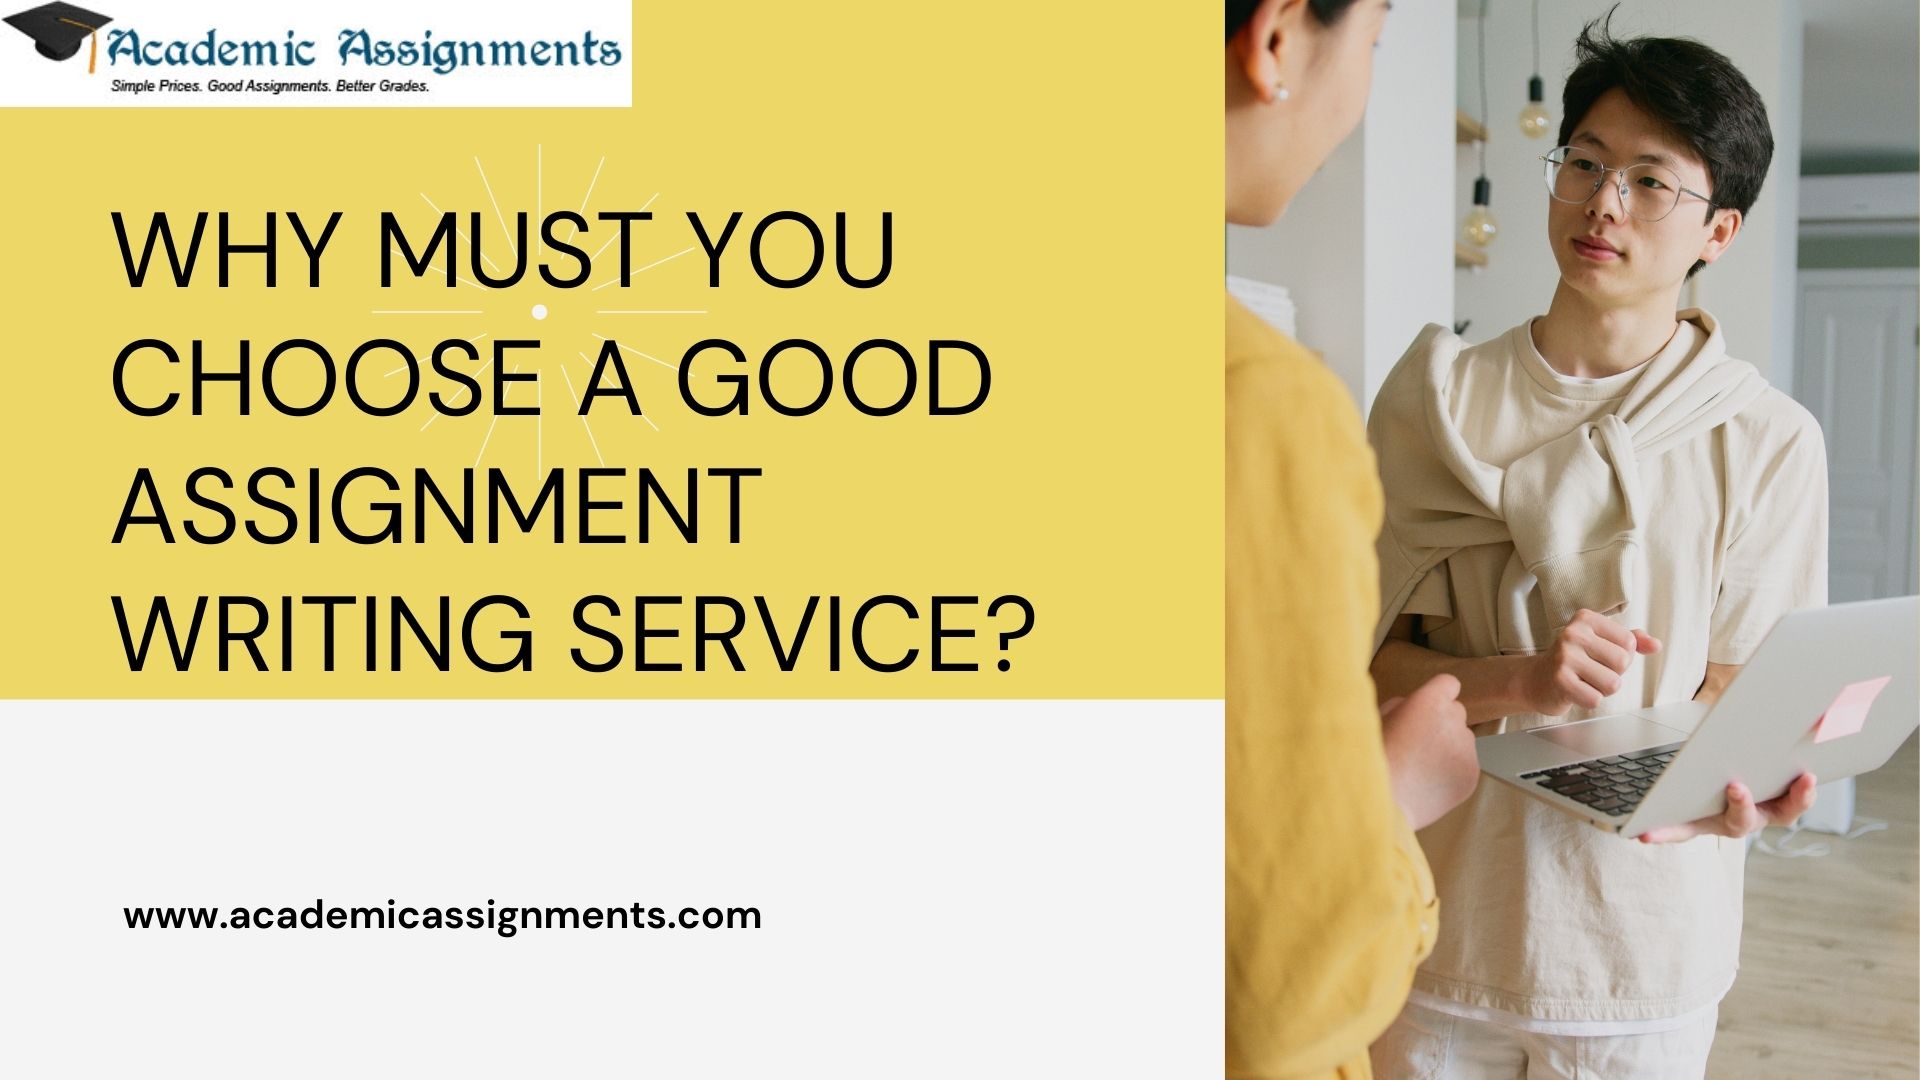 WHY MUST YOU CHOOSE A GOOD ASSIGNMENT WRITING SERVICE